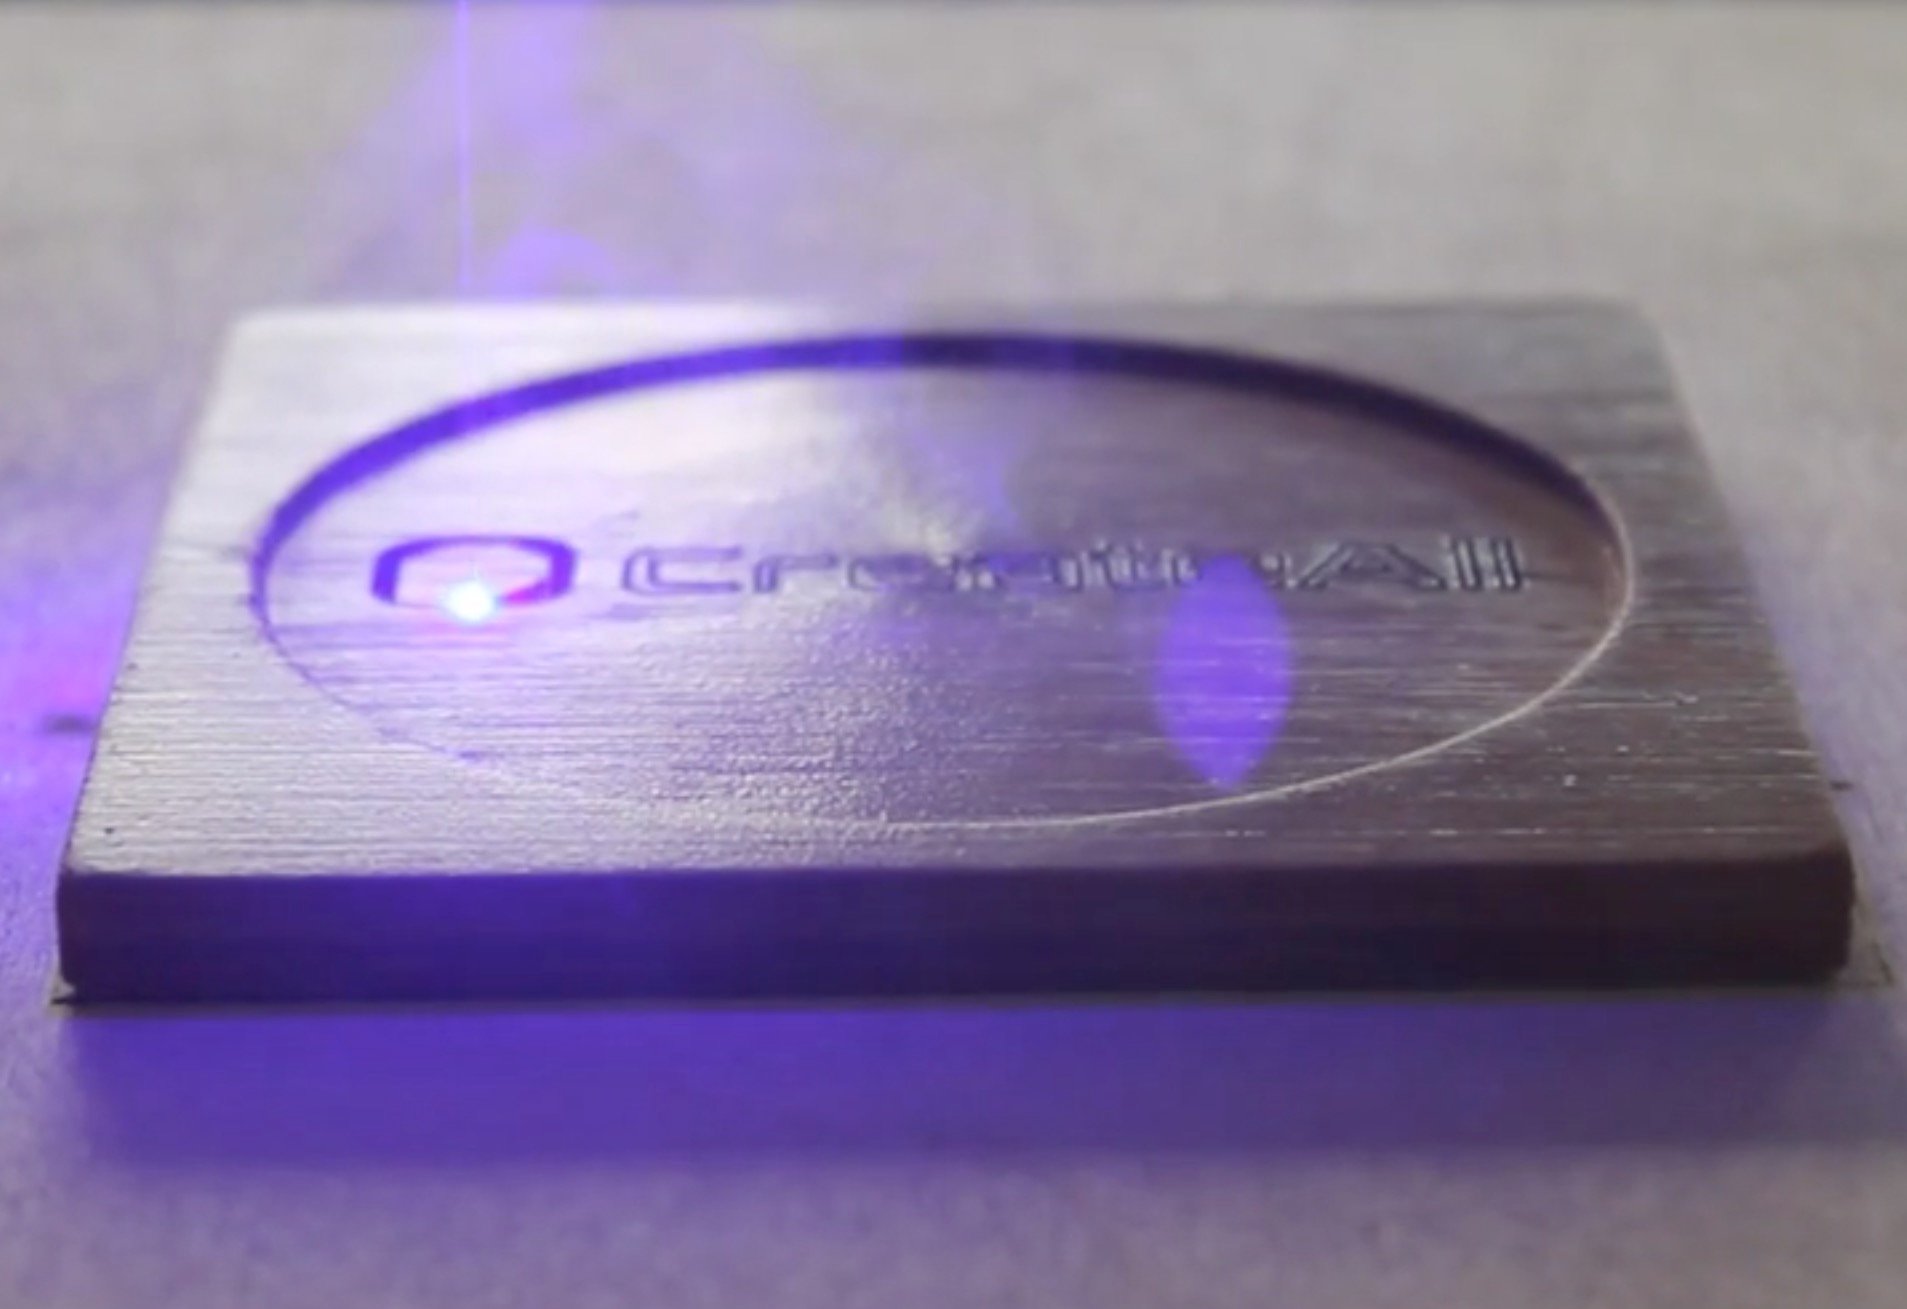  Laser etching with the Versa3D 